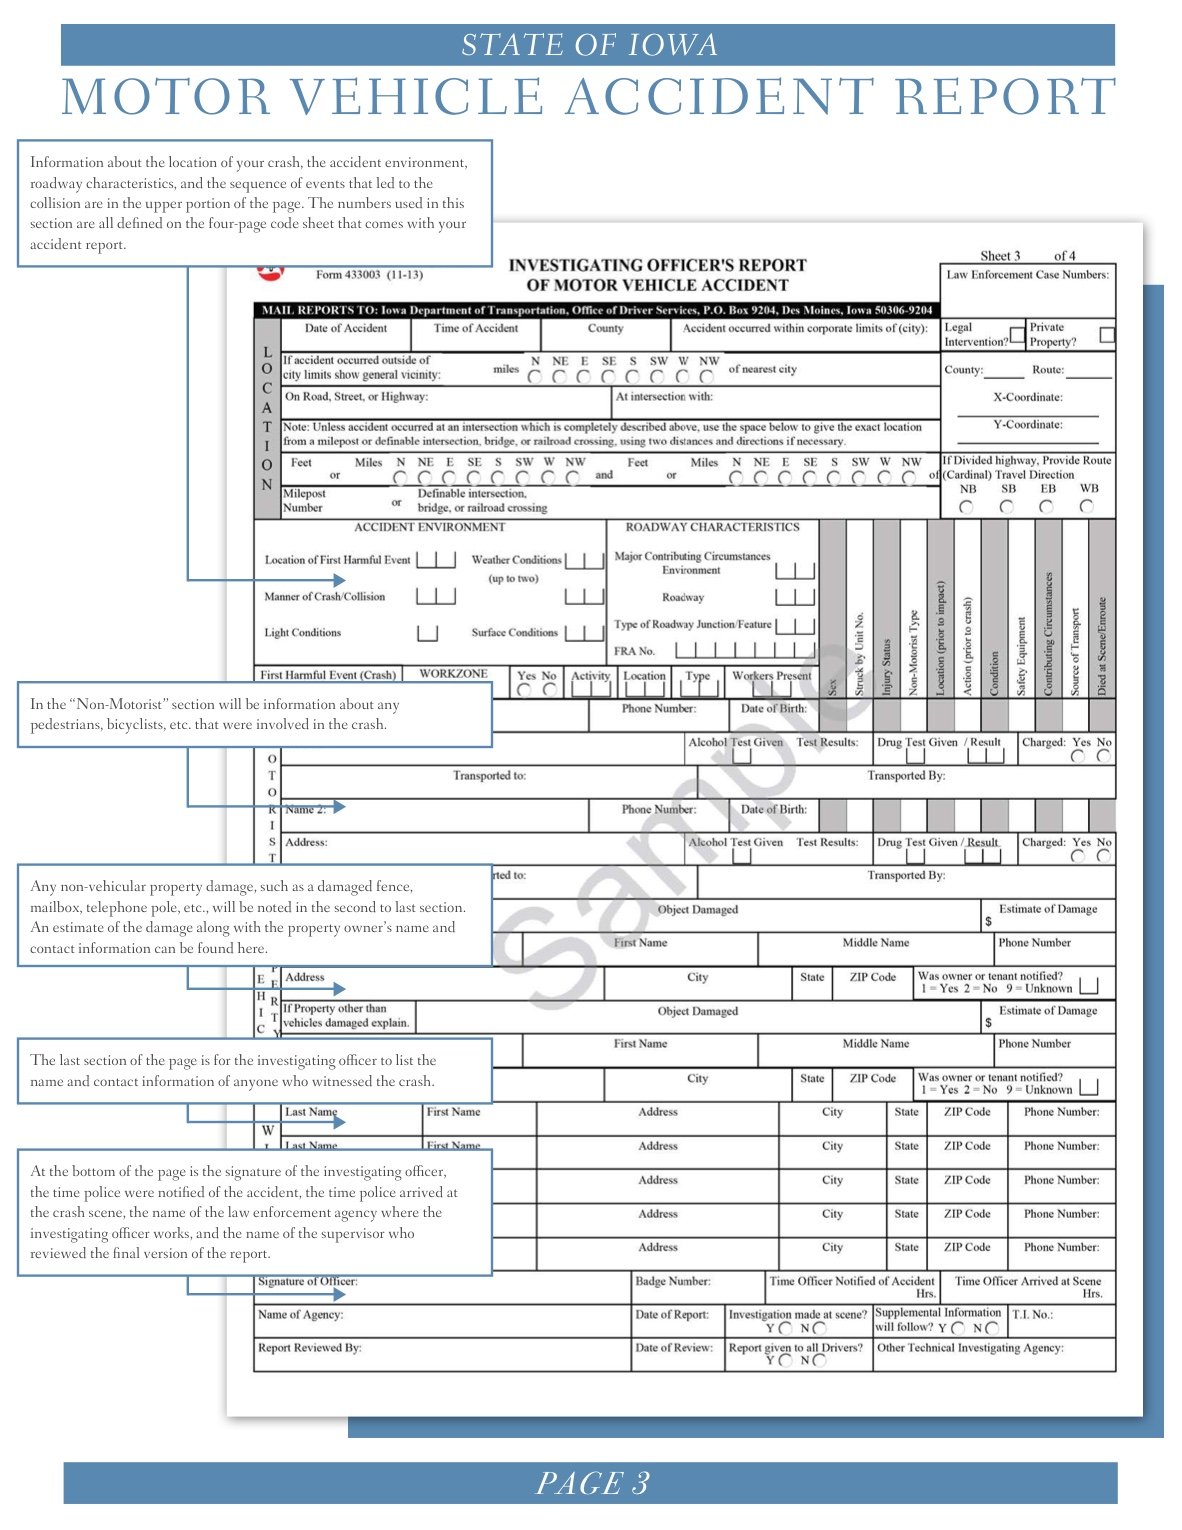 Iowa Accident Report page 3